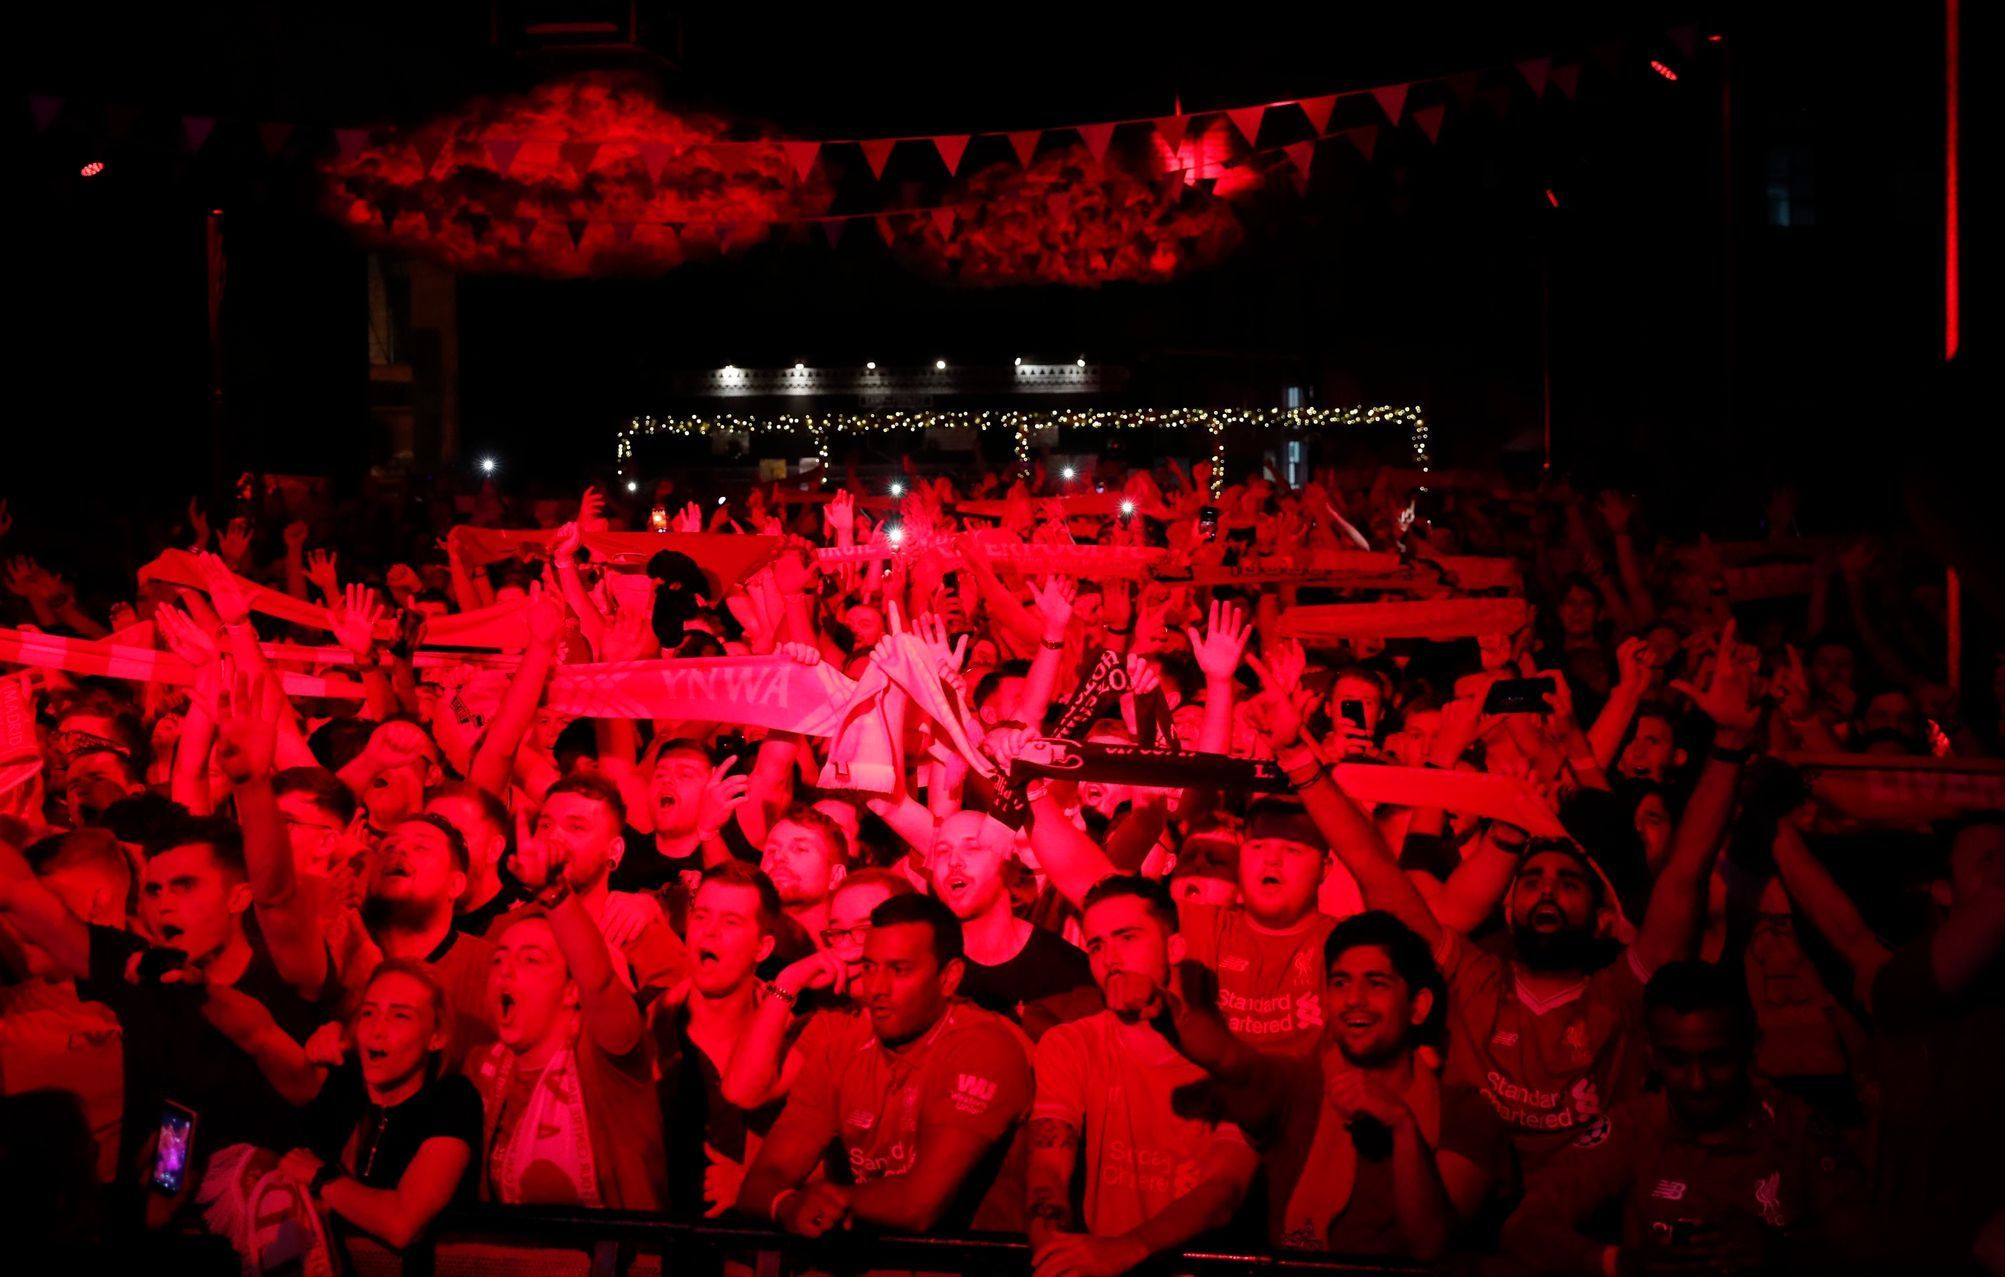 Champions League Final - Liverpool fans watching the final in Liverpool